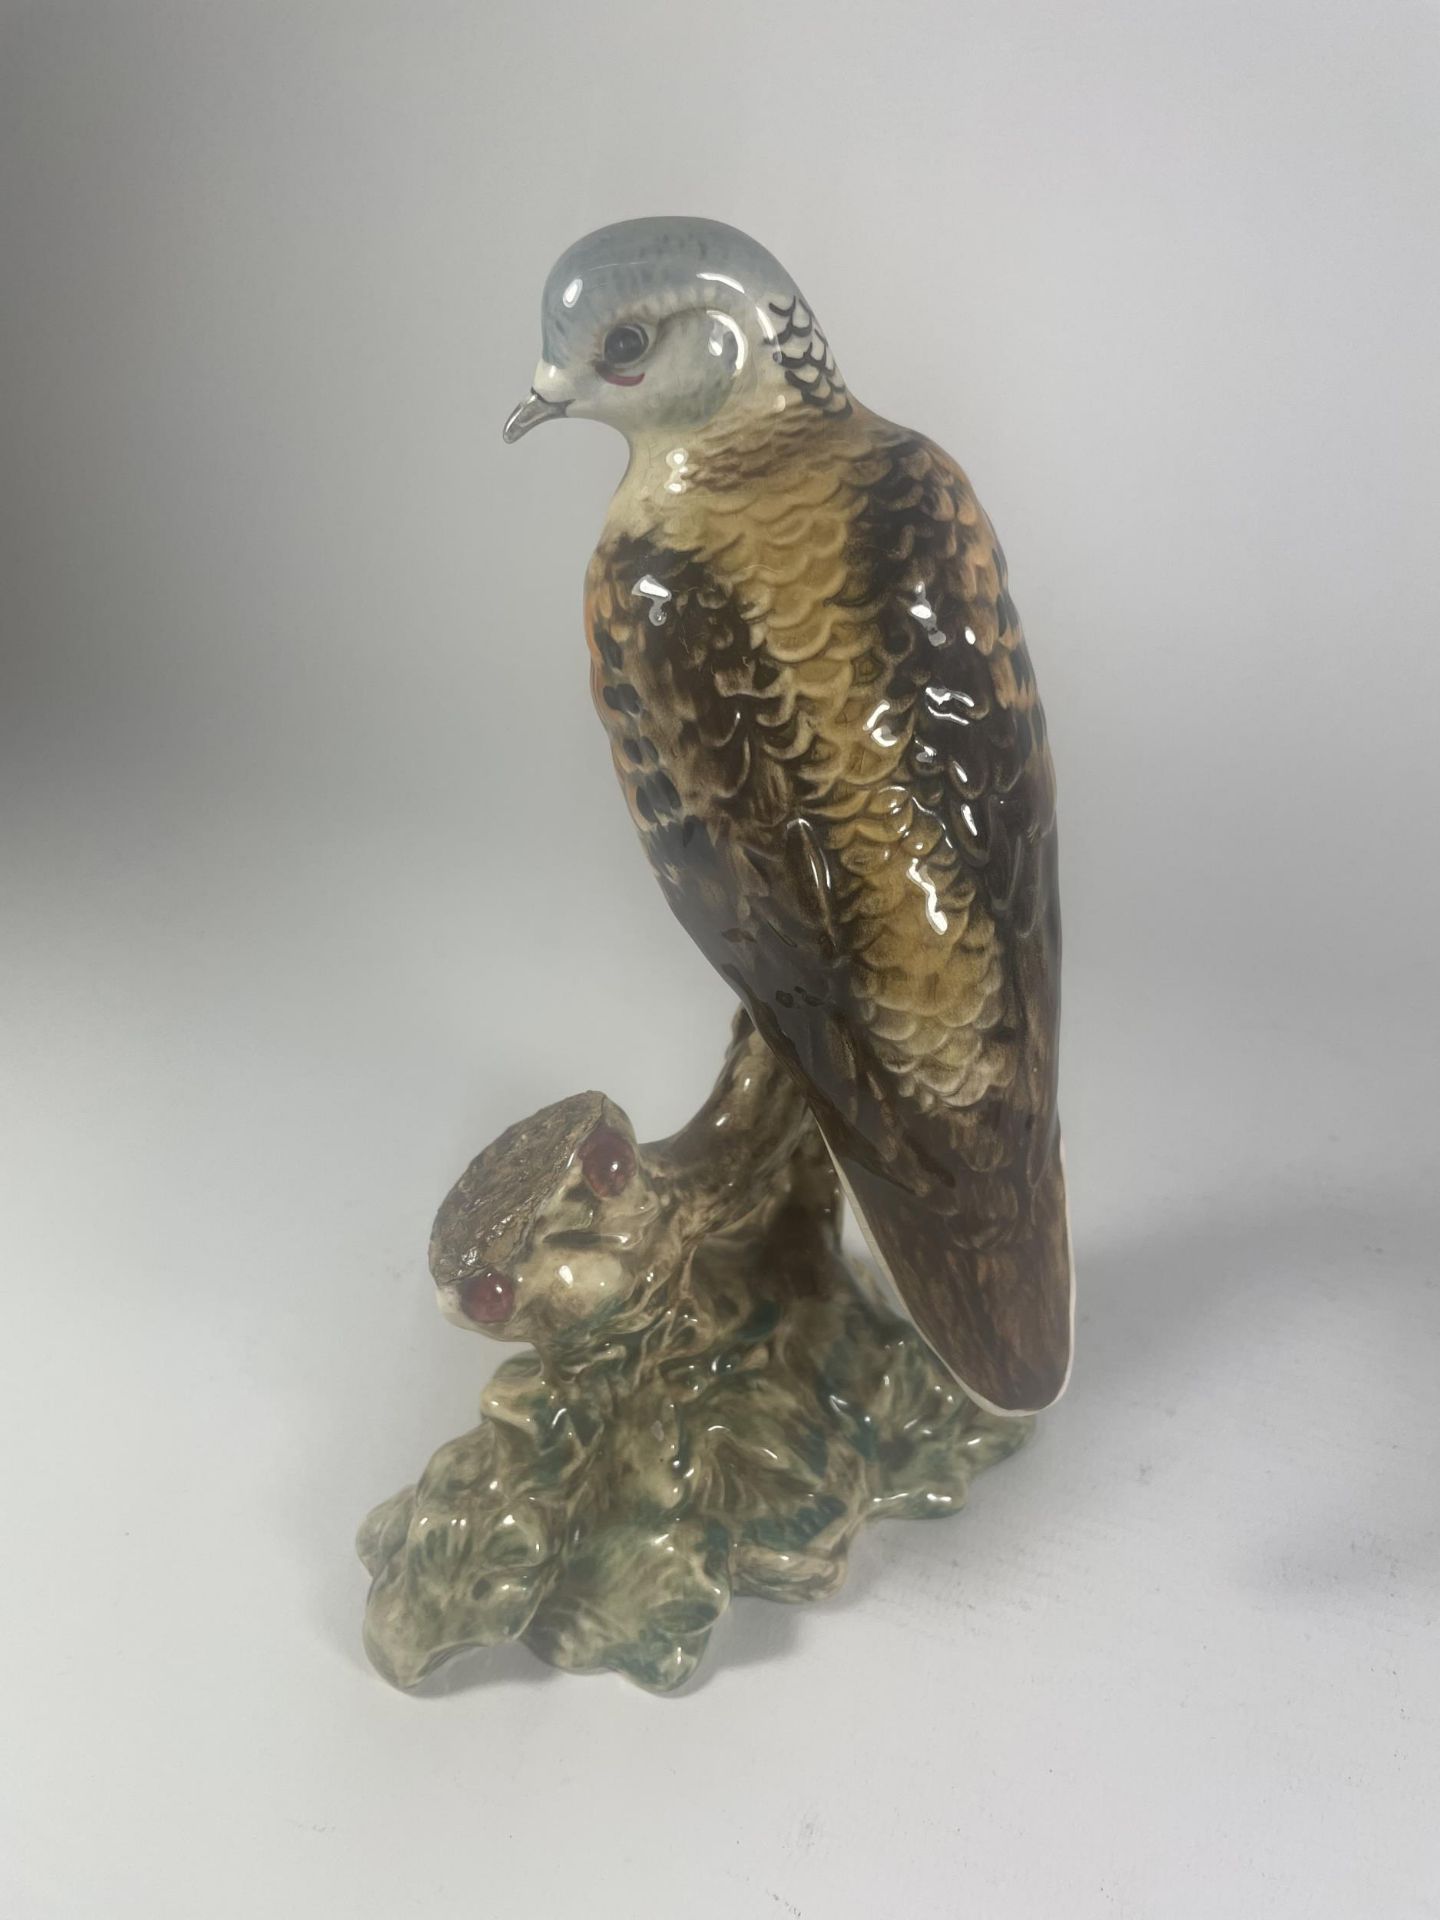 A BESWICK 1022 BIRD FIGURE A/F WITH A BIRD MISSING - Image 2 of 4